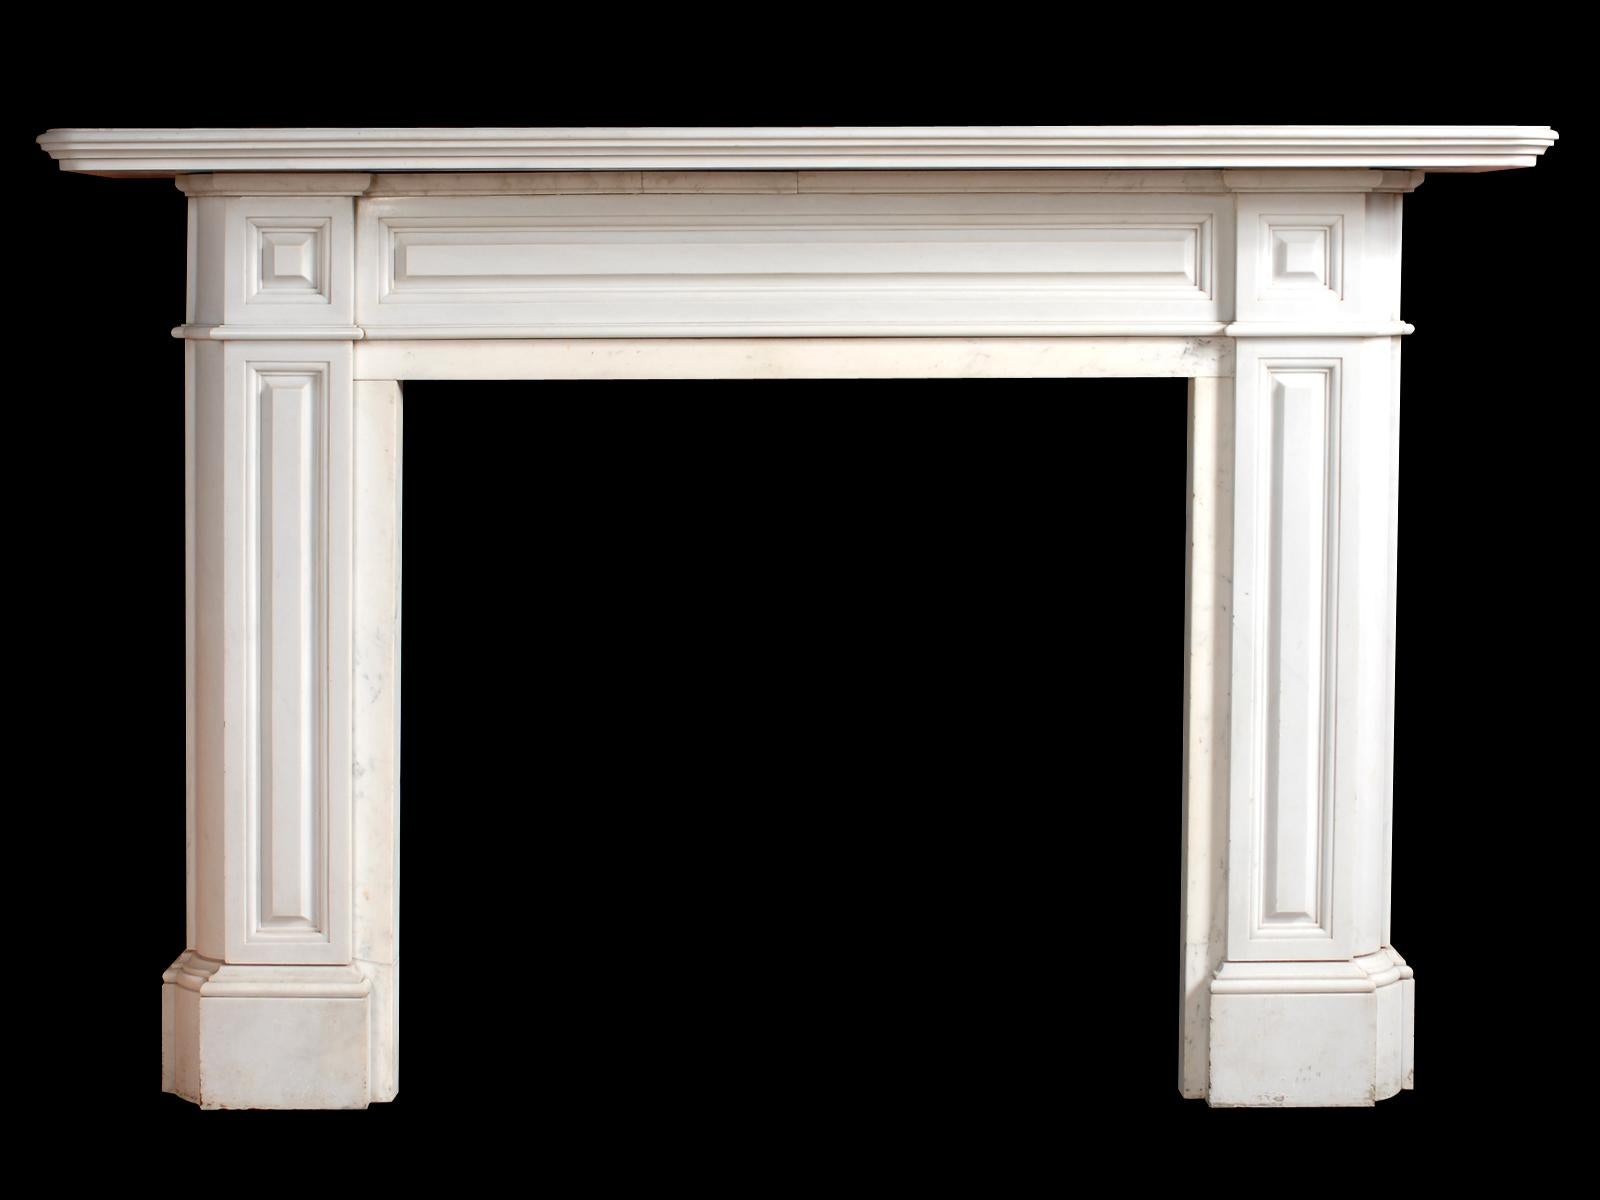 A very large and substantial, Italian statuary white marble fireplace in the Regency manner. Having a generous stepped and moulded mantel. The frieze, jambs and end blocks with conforming raised fielded panels, mid-19th century.